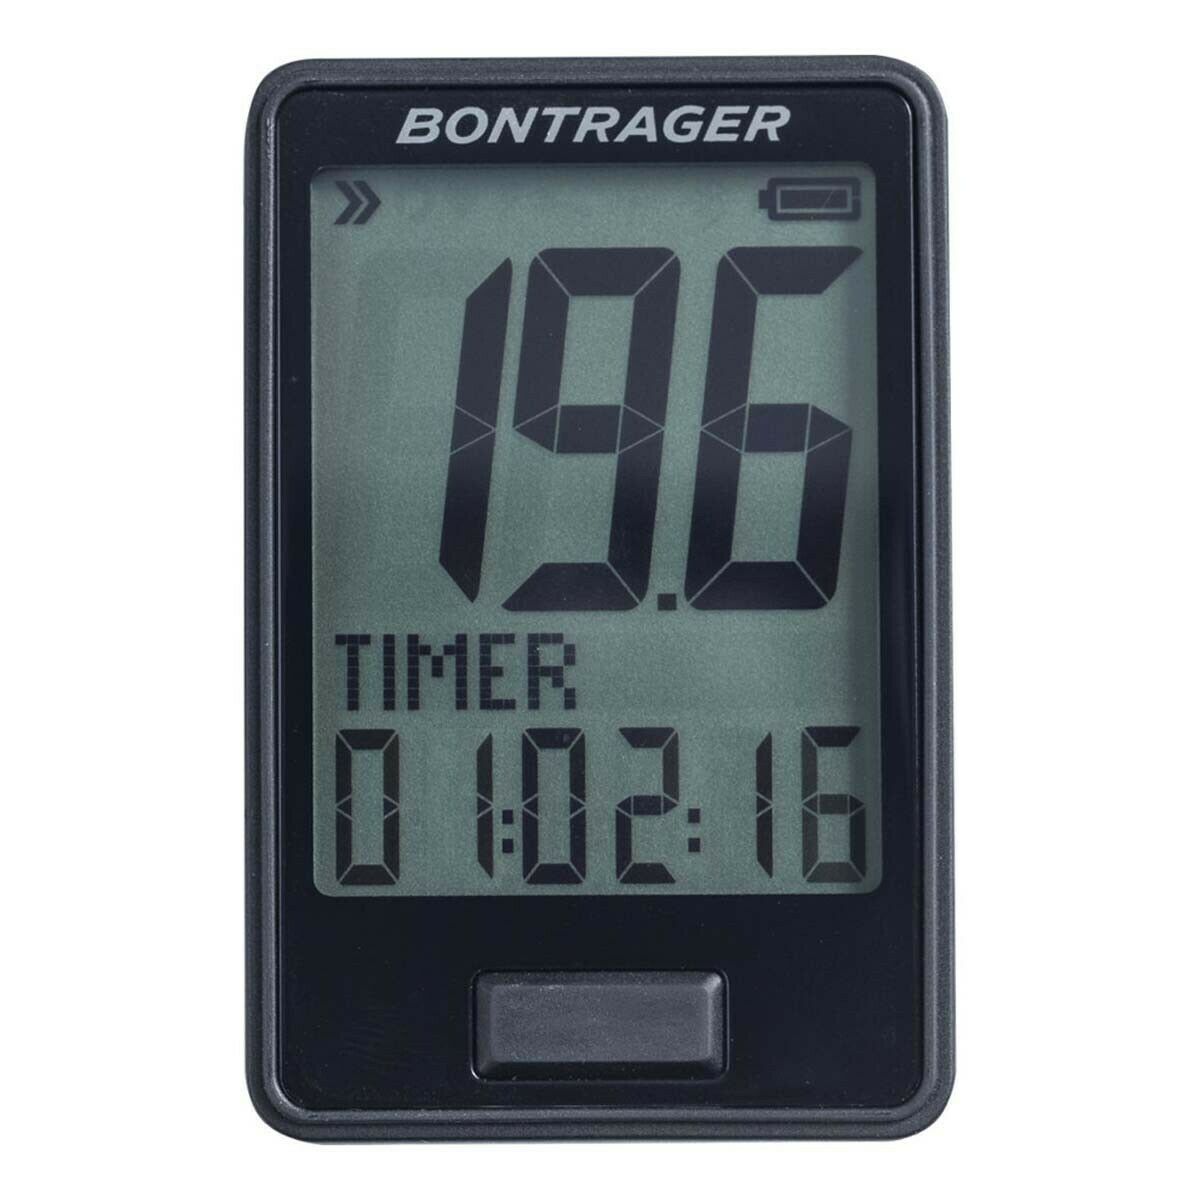 Bontrager Ridetime Cycling Computer 553889 New Free Shipping